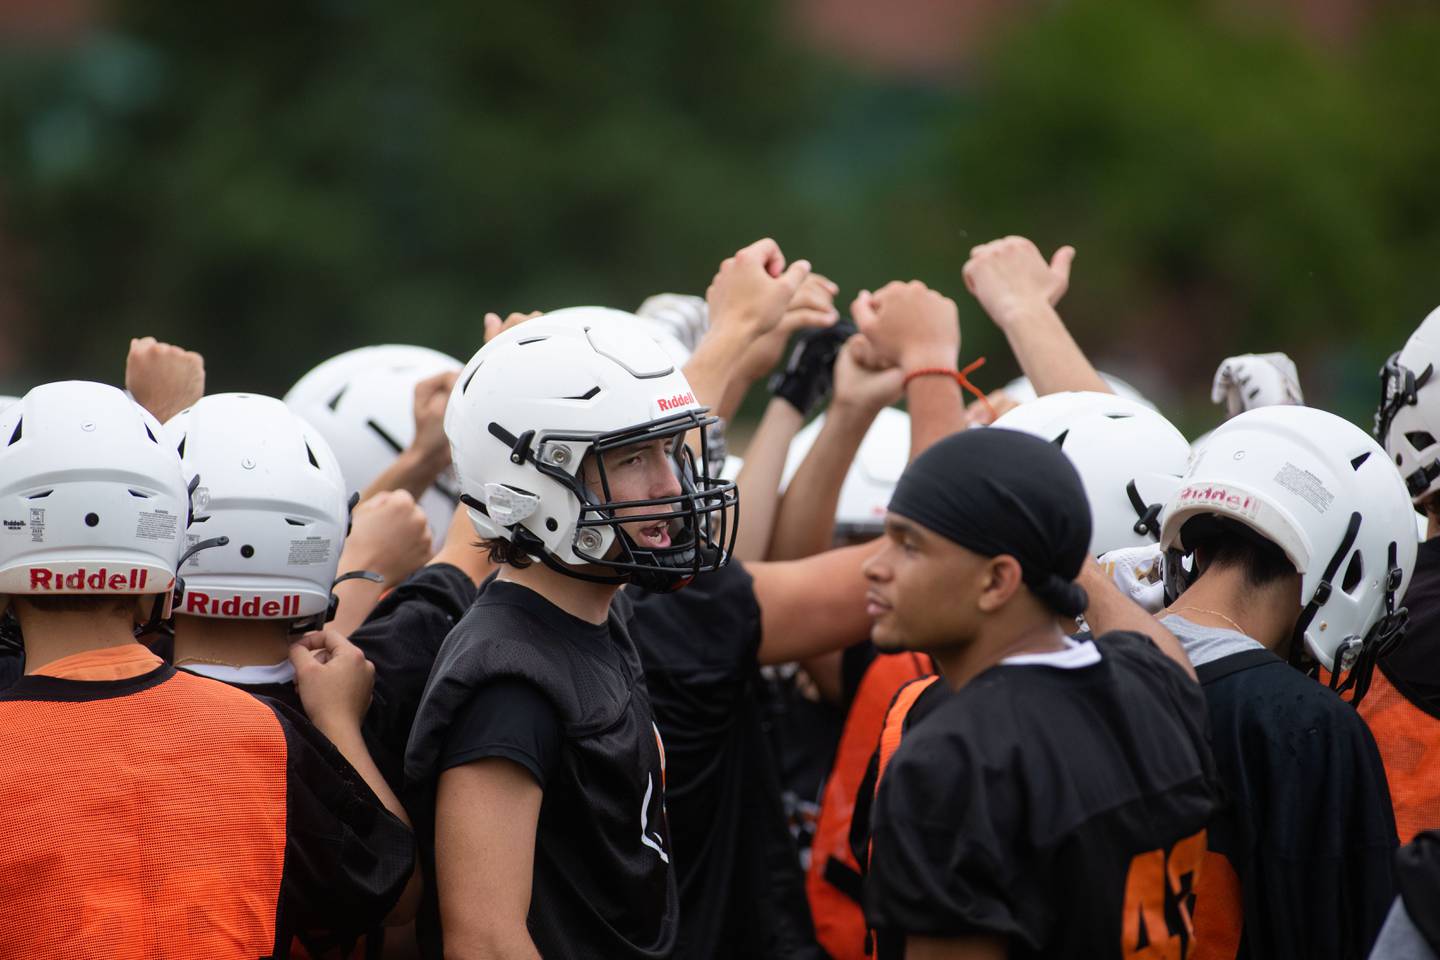 Blake Schuette chants during a huddle during practice at St. Charles East on Monday, Aug. 8, 2022.